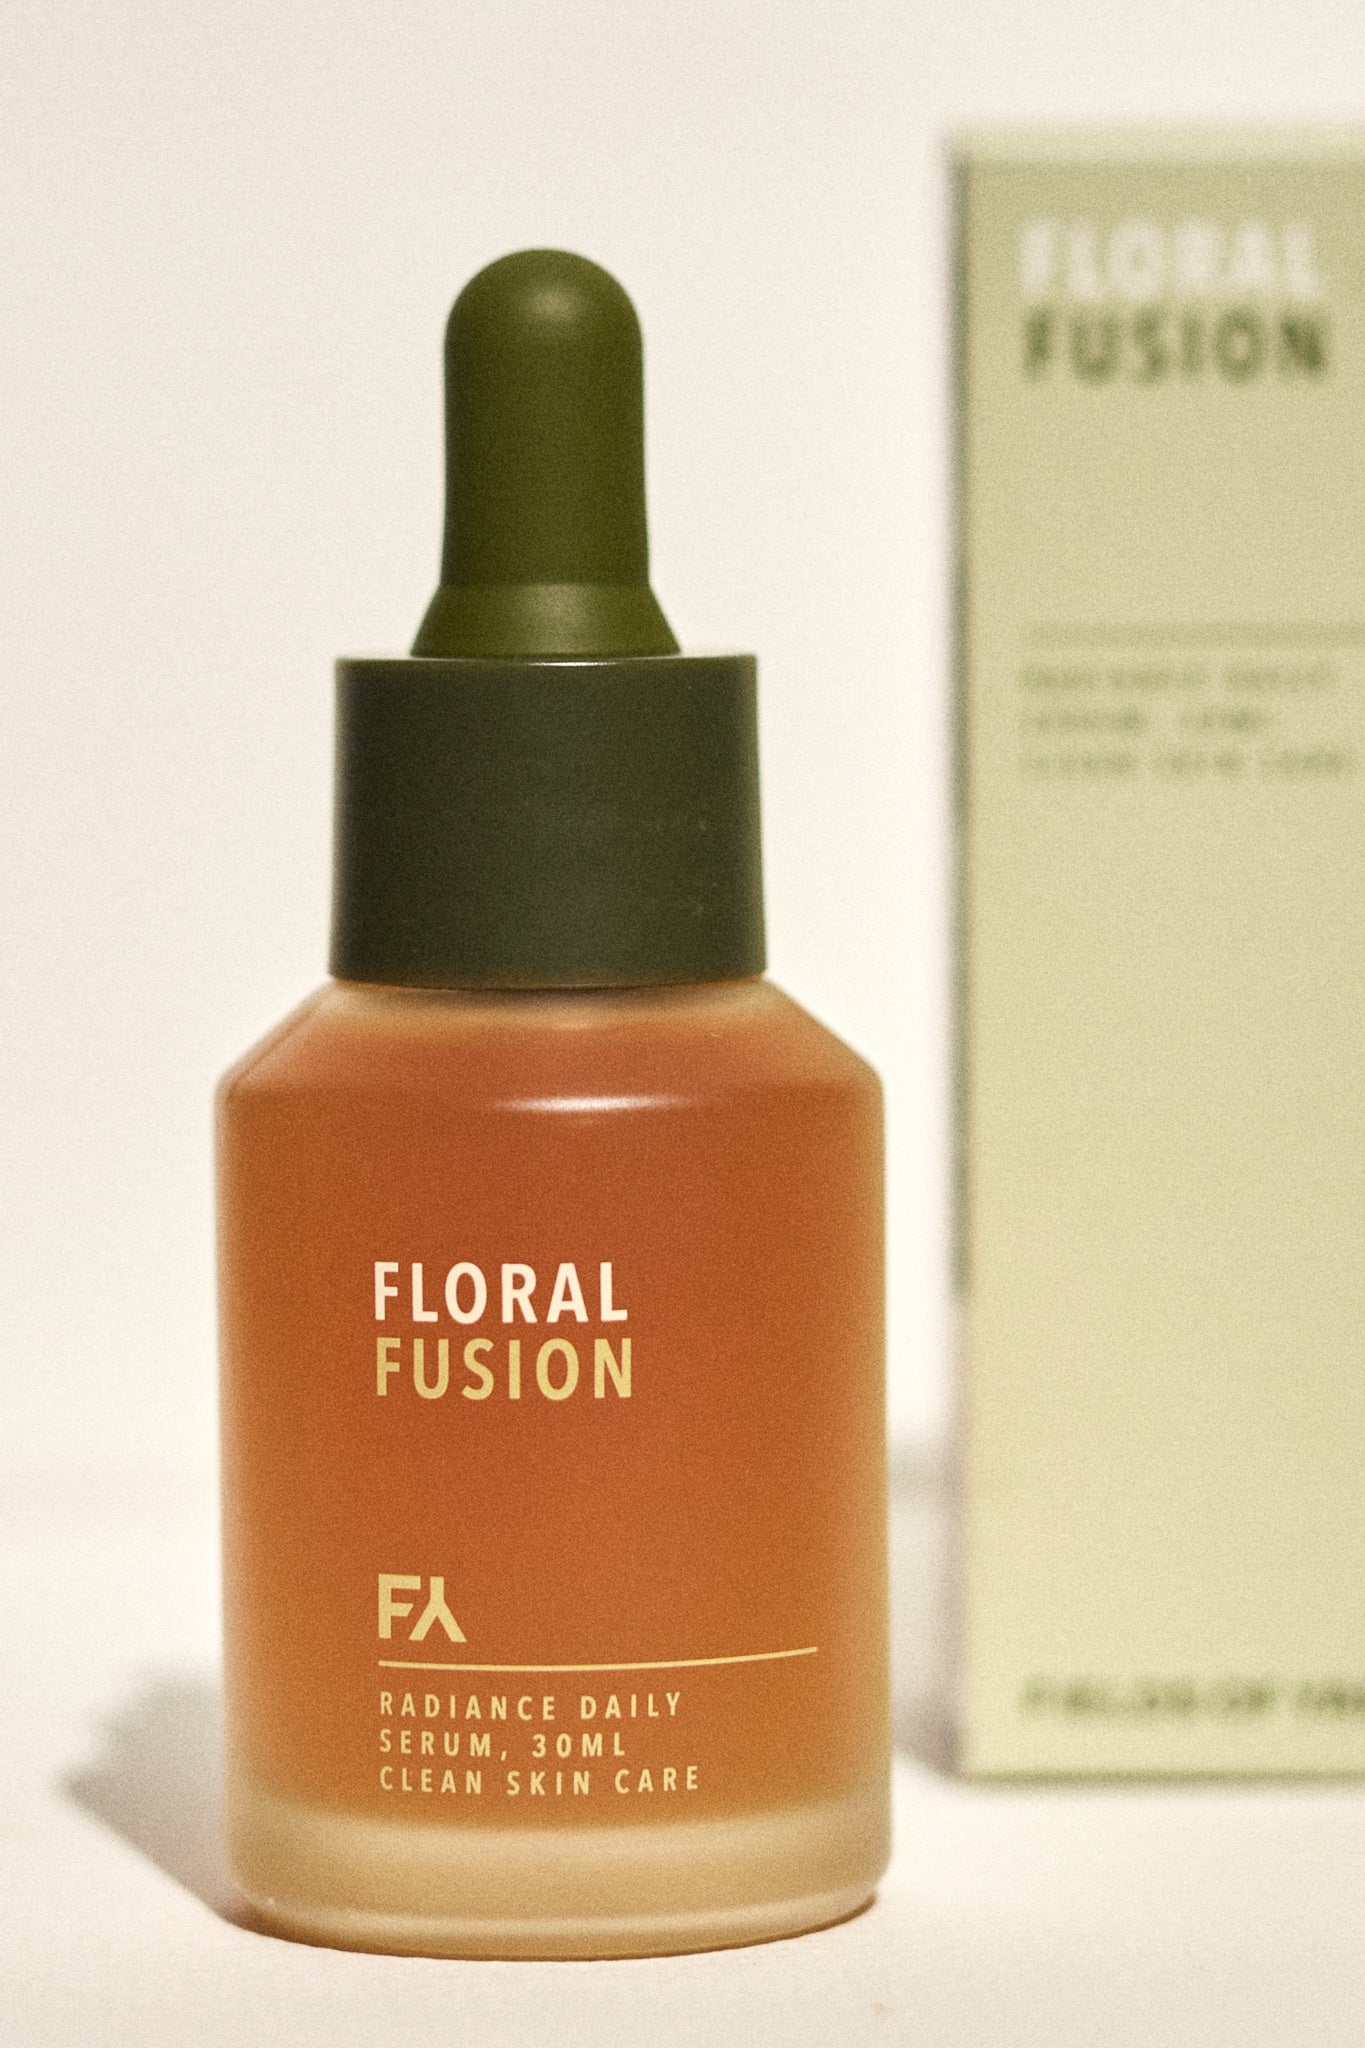 Campaign shot showing the Floral Fusion Radiance Daily Serum by Fields of Yarrow next to its packaging